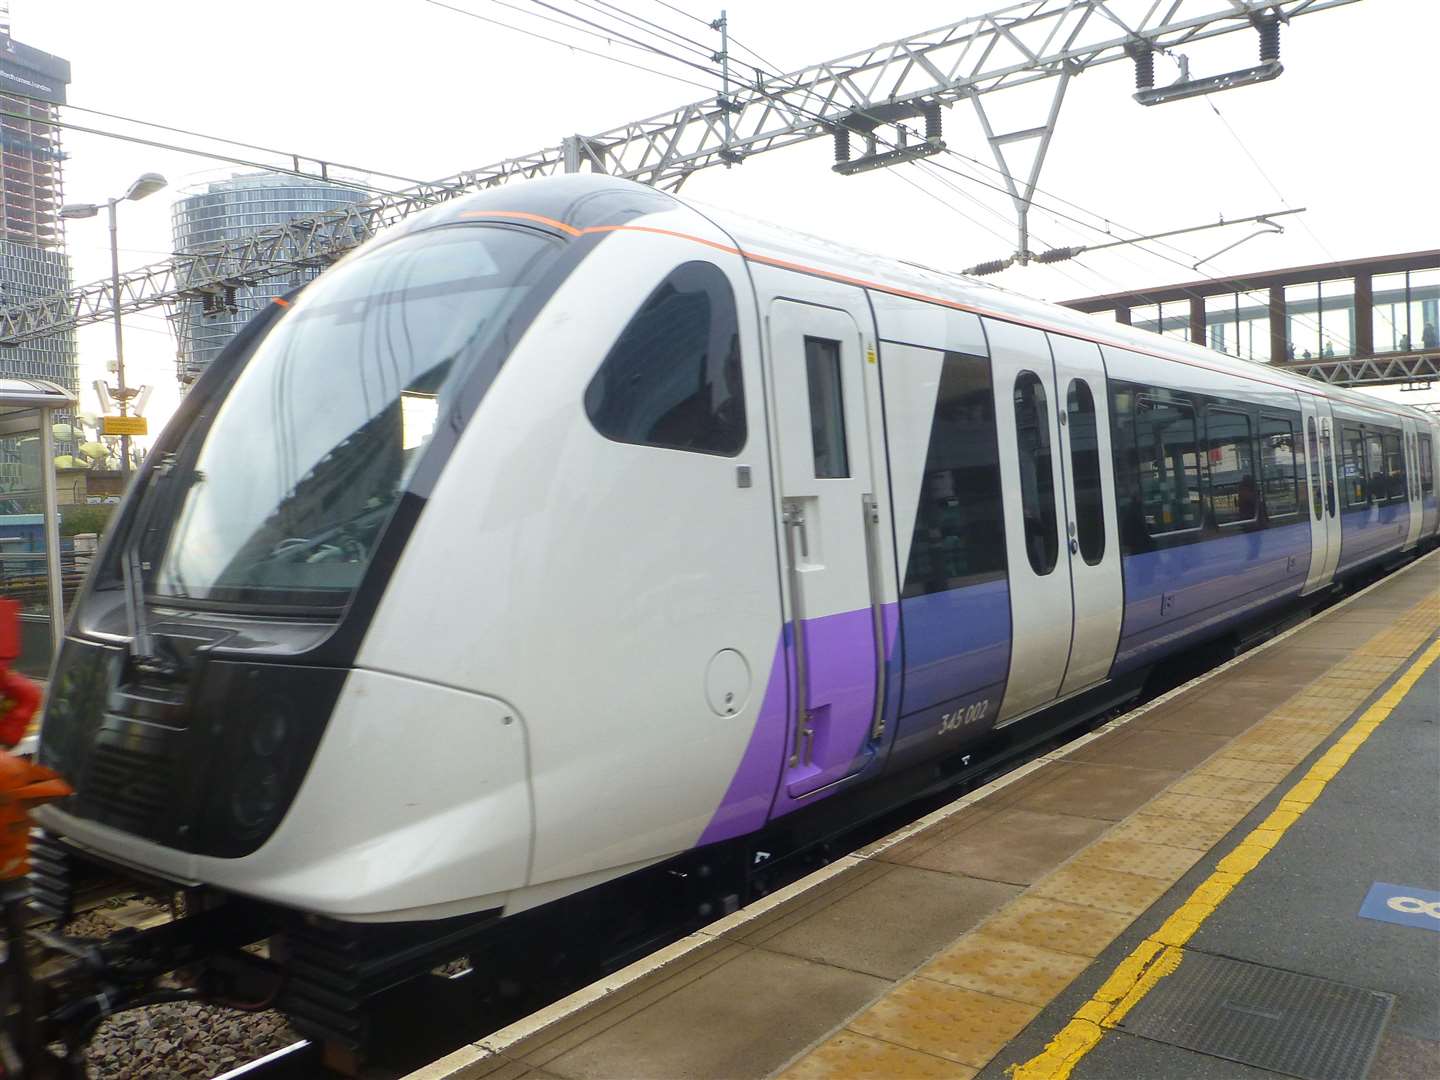 The first phase of the Elizabeth line has been subject to delays